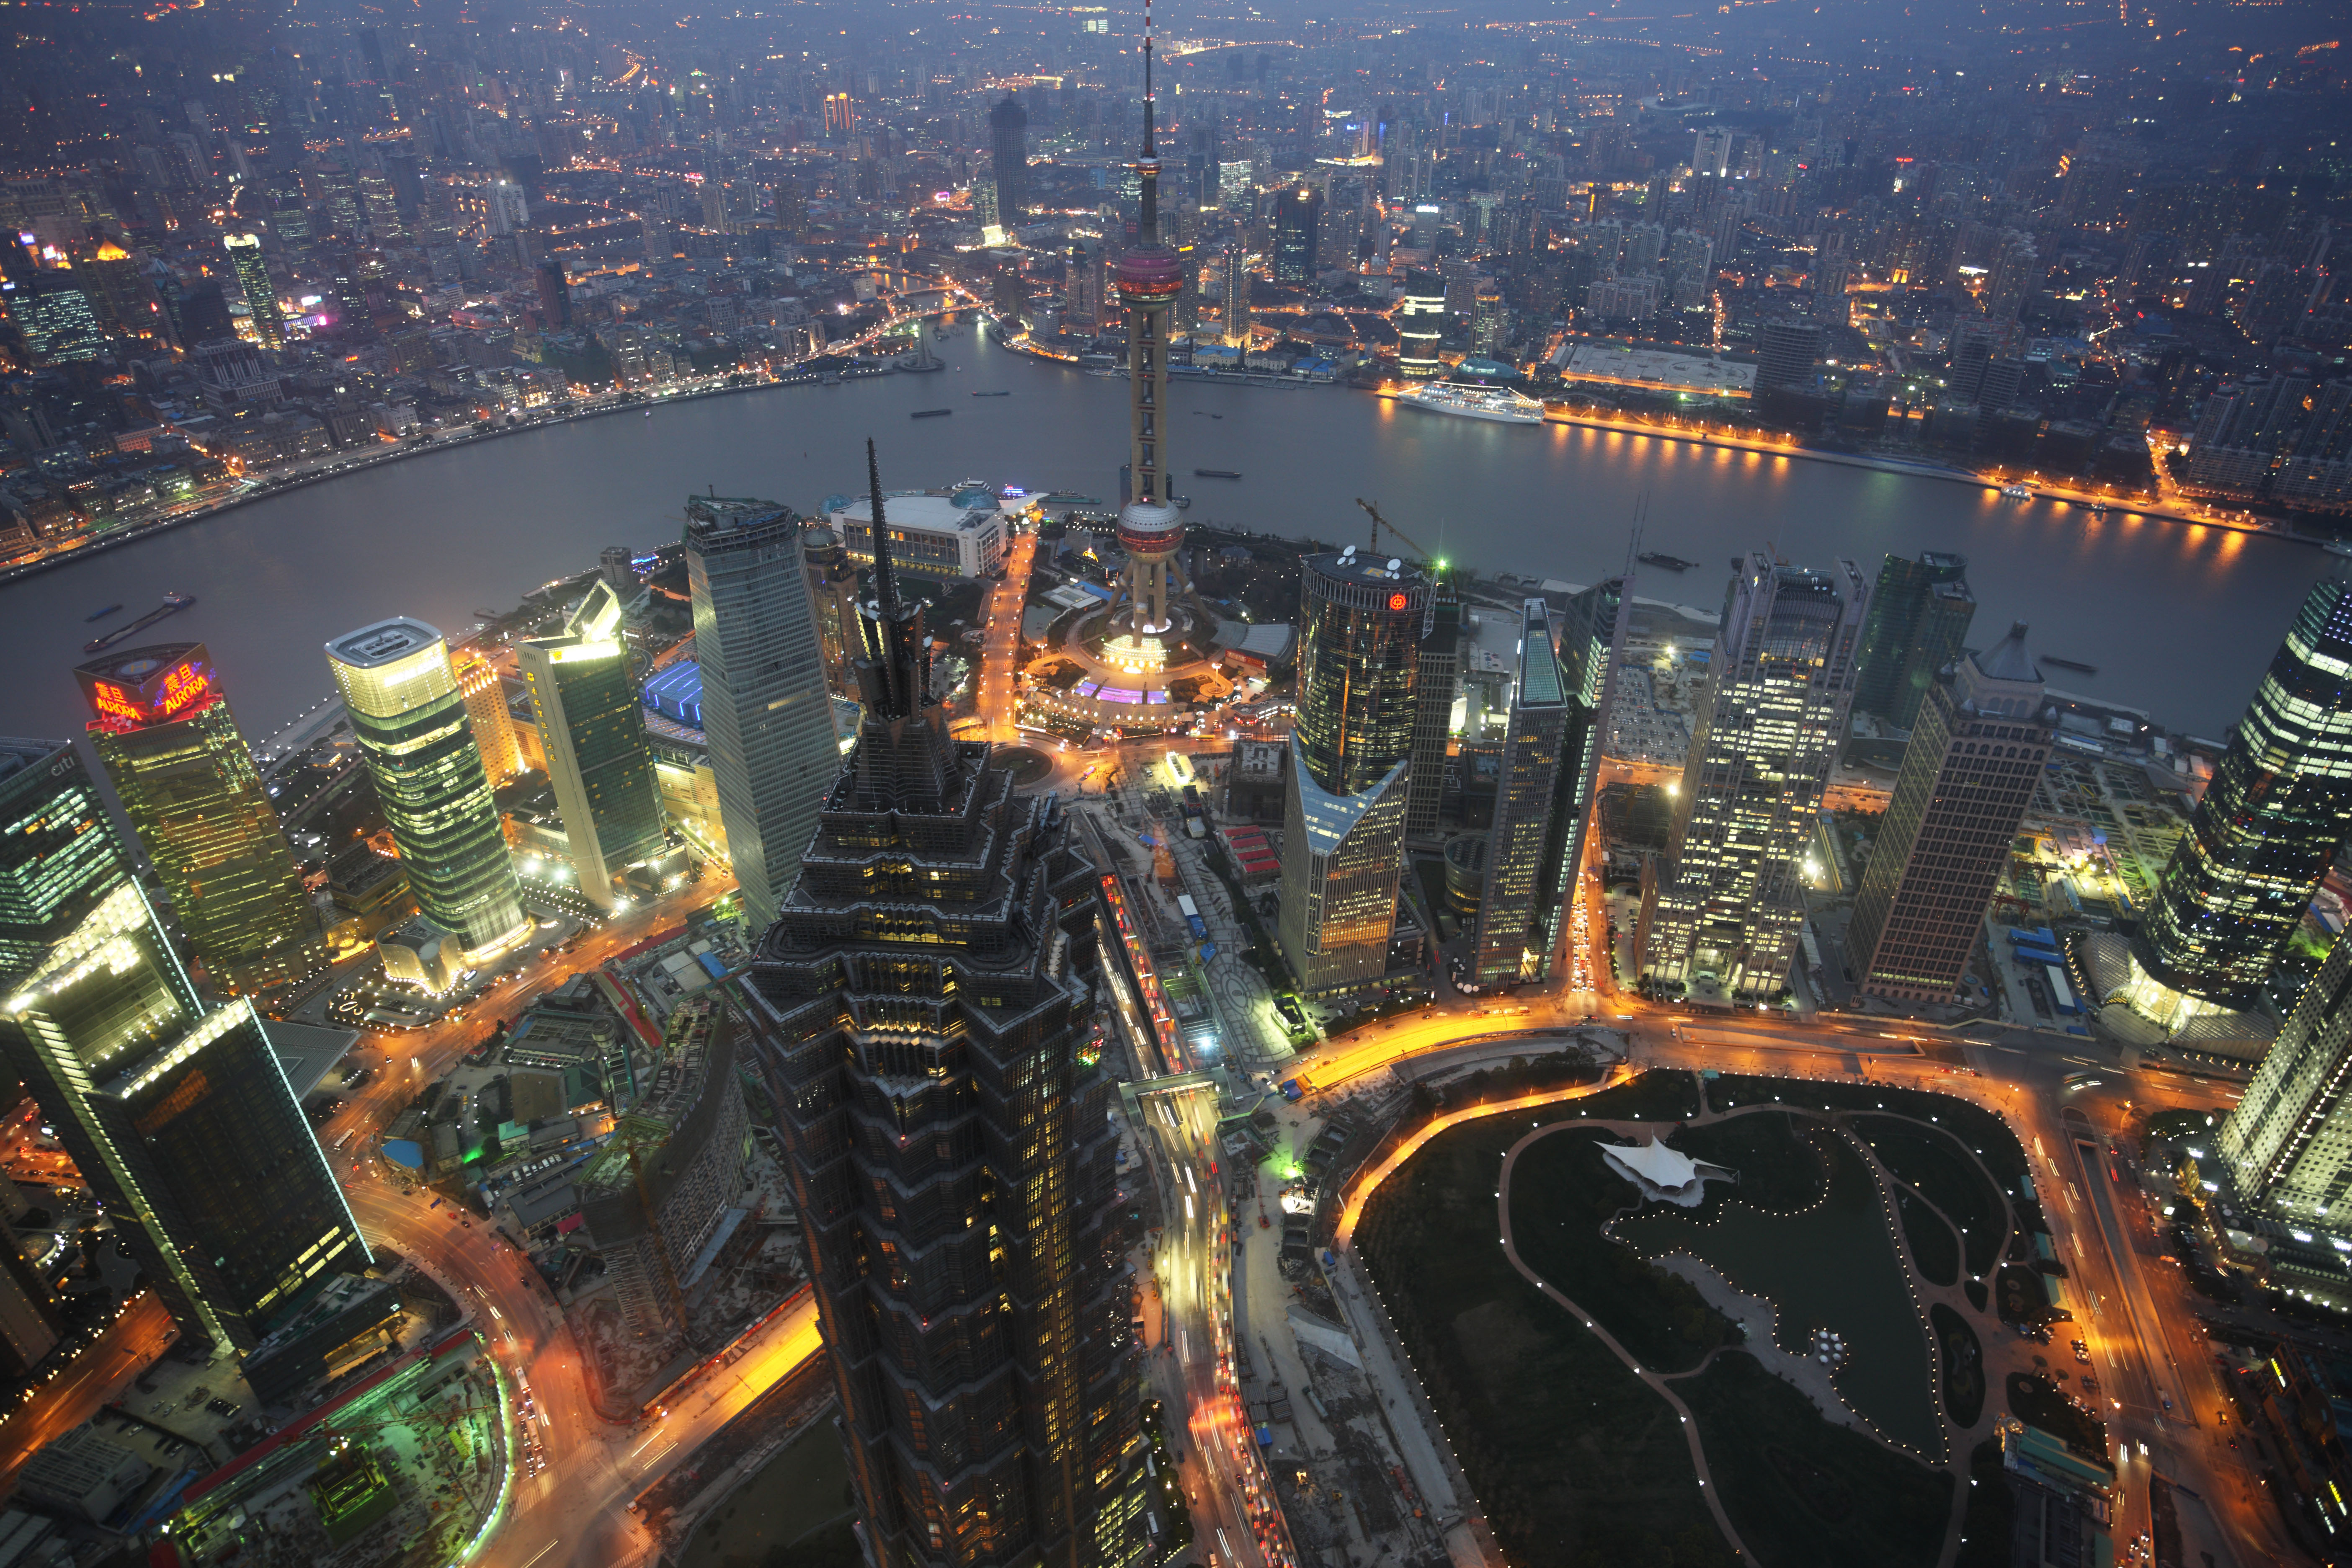 photo,material,free,landscape,picture,stock photo,Creative Commons,Dusk of Shanghai, superb view, I light it up, Watch east light ball train; a tower, skyscraper